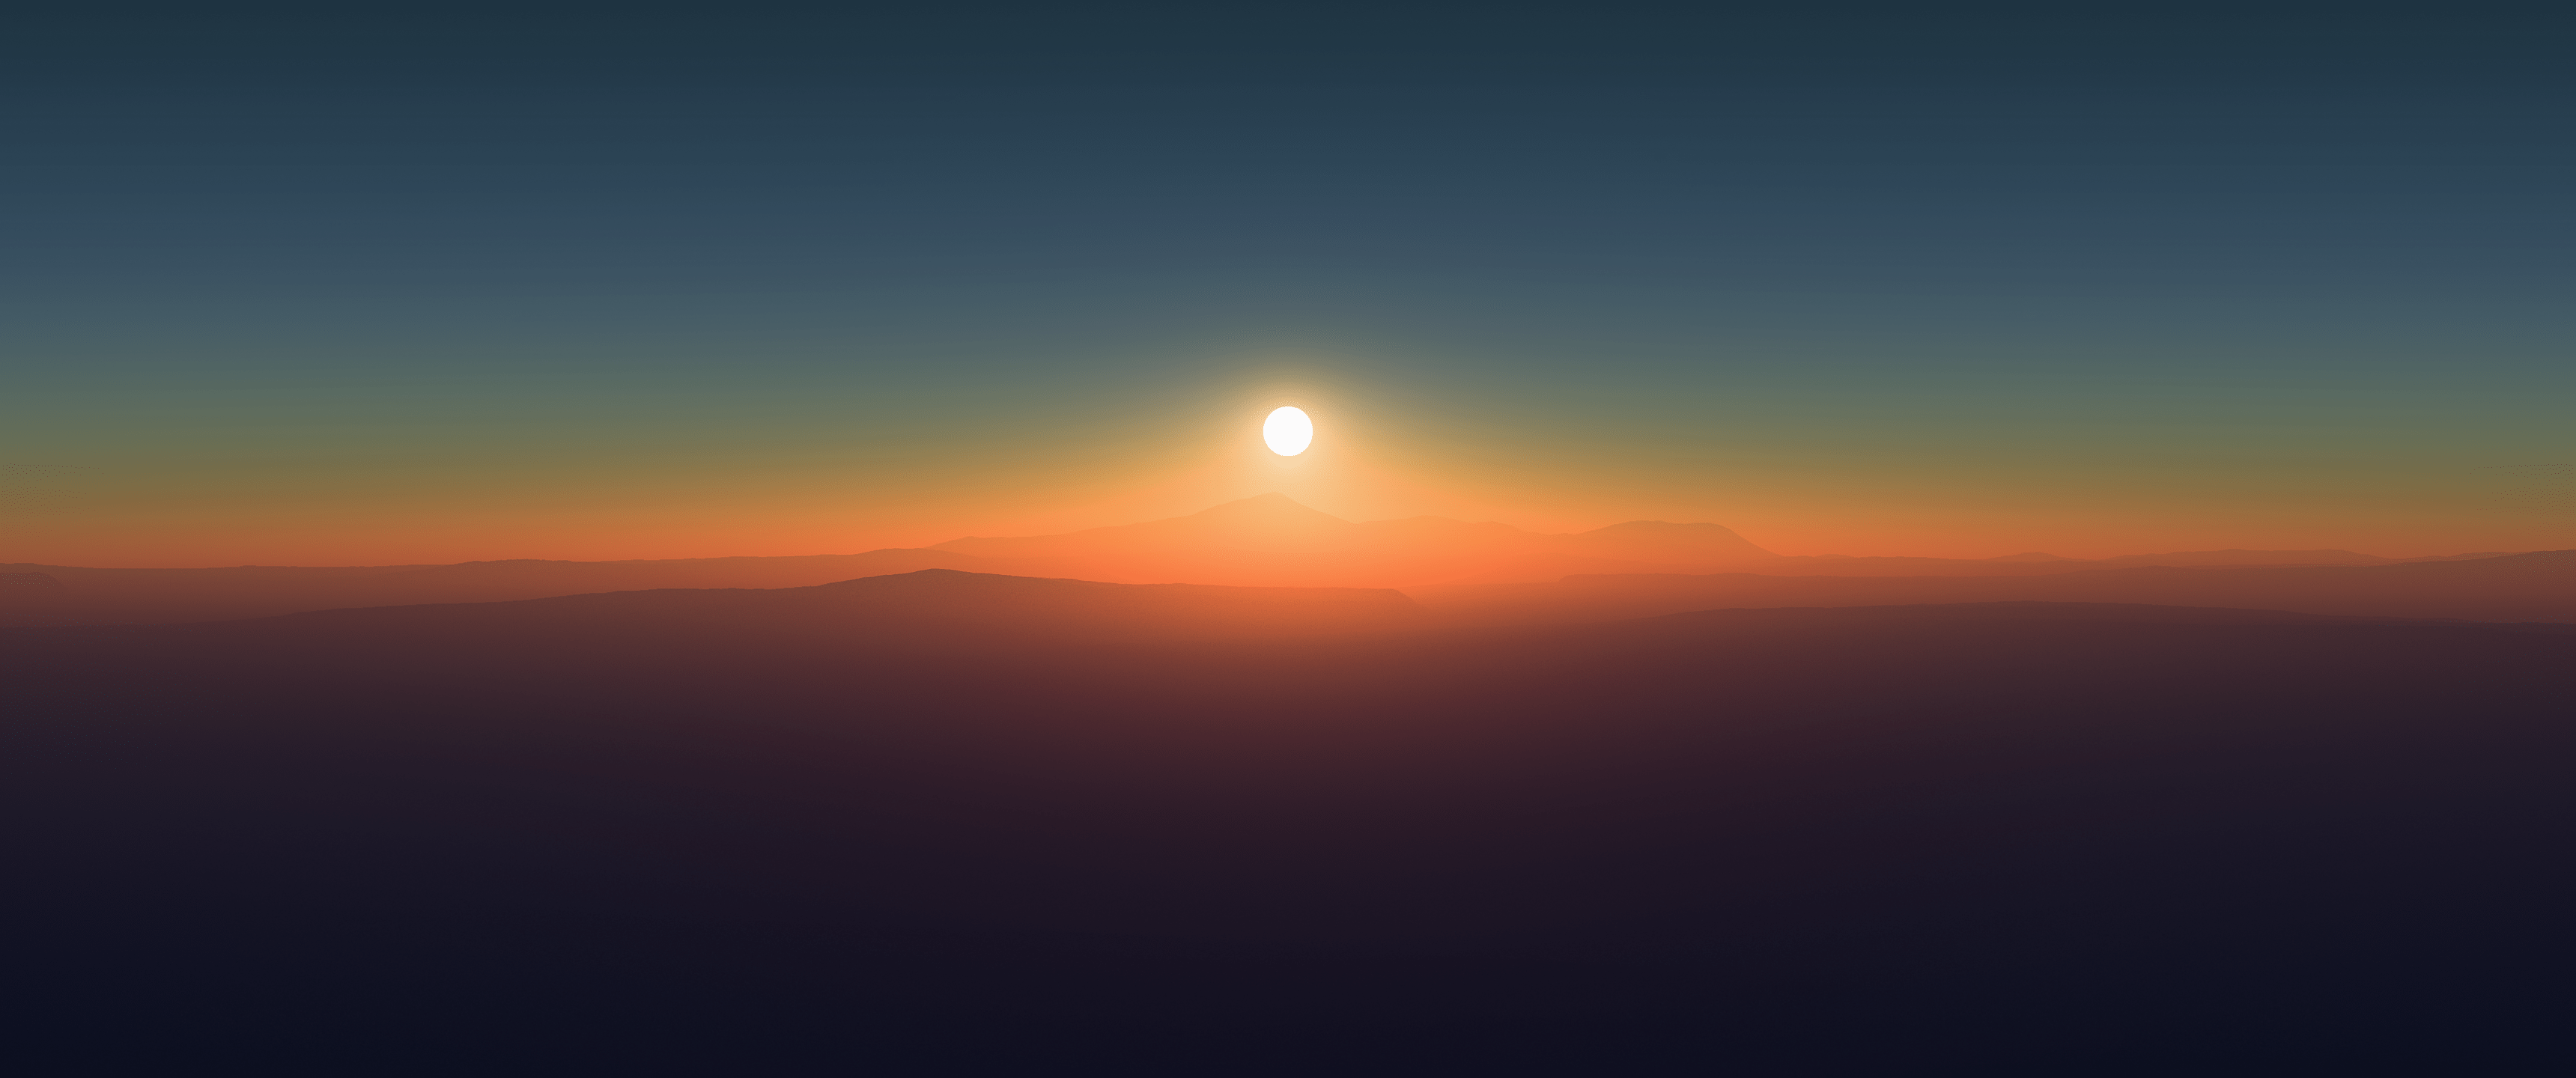 A sunset with mountains in the background - 3440x1440